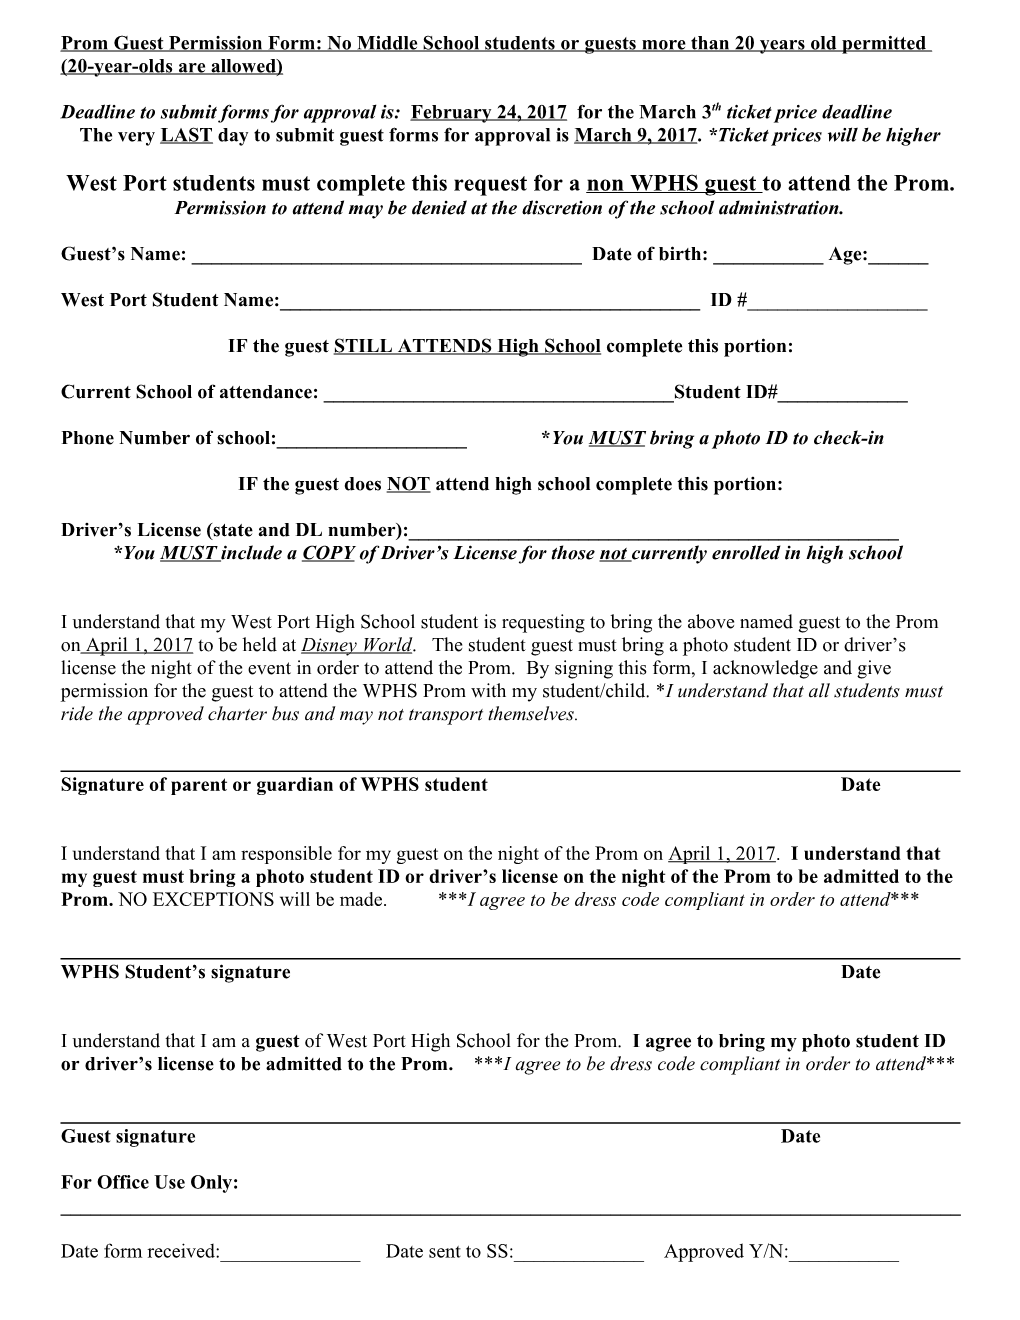 West Port Student S Must Complete This Request for a Guest to Attend the Spring Formal